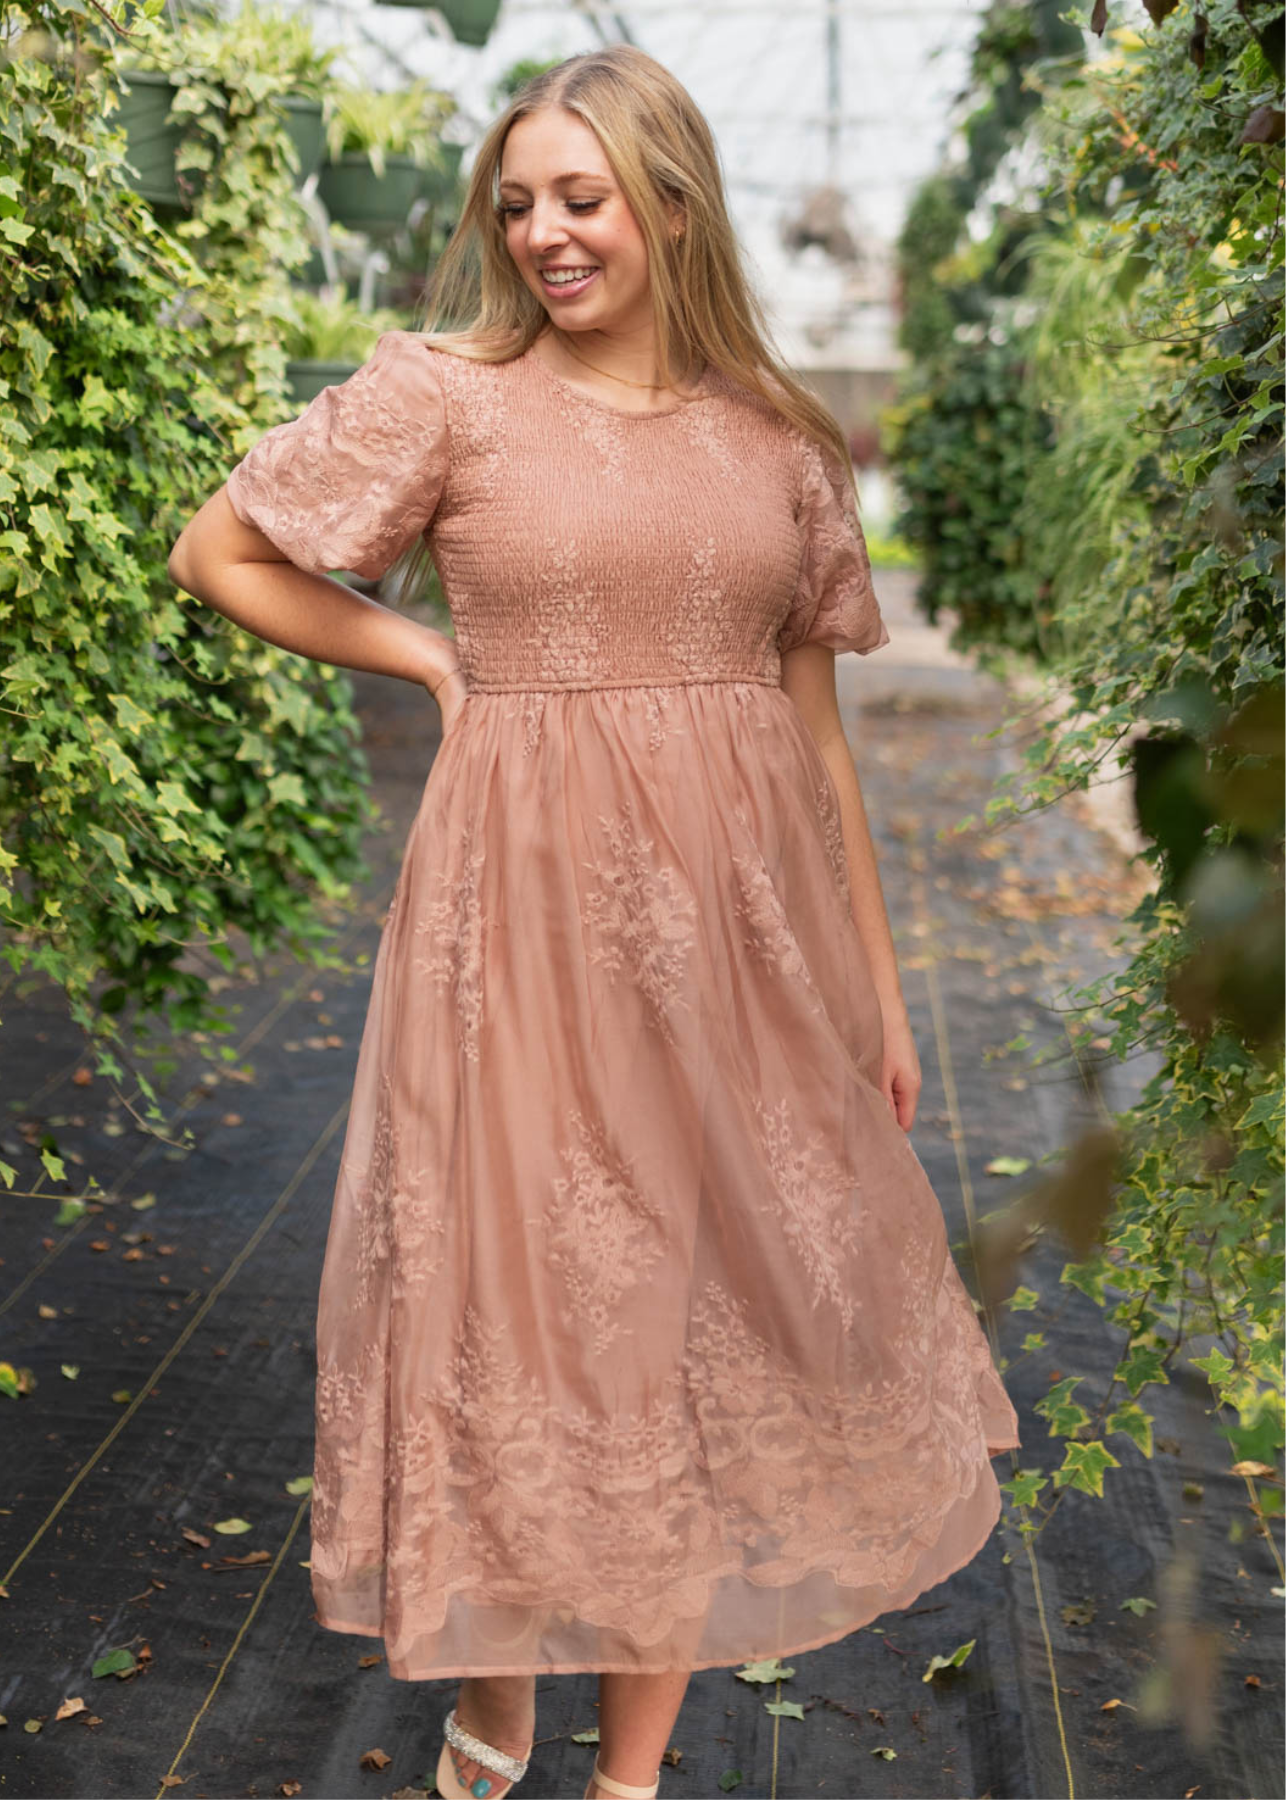 Dusty pink embroidered dress with short sleeves and smocked bodice